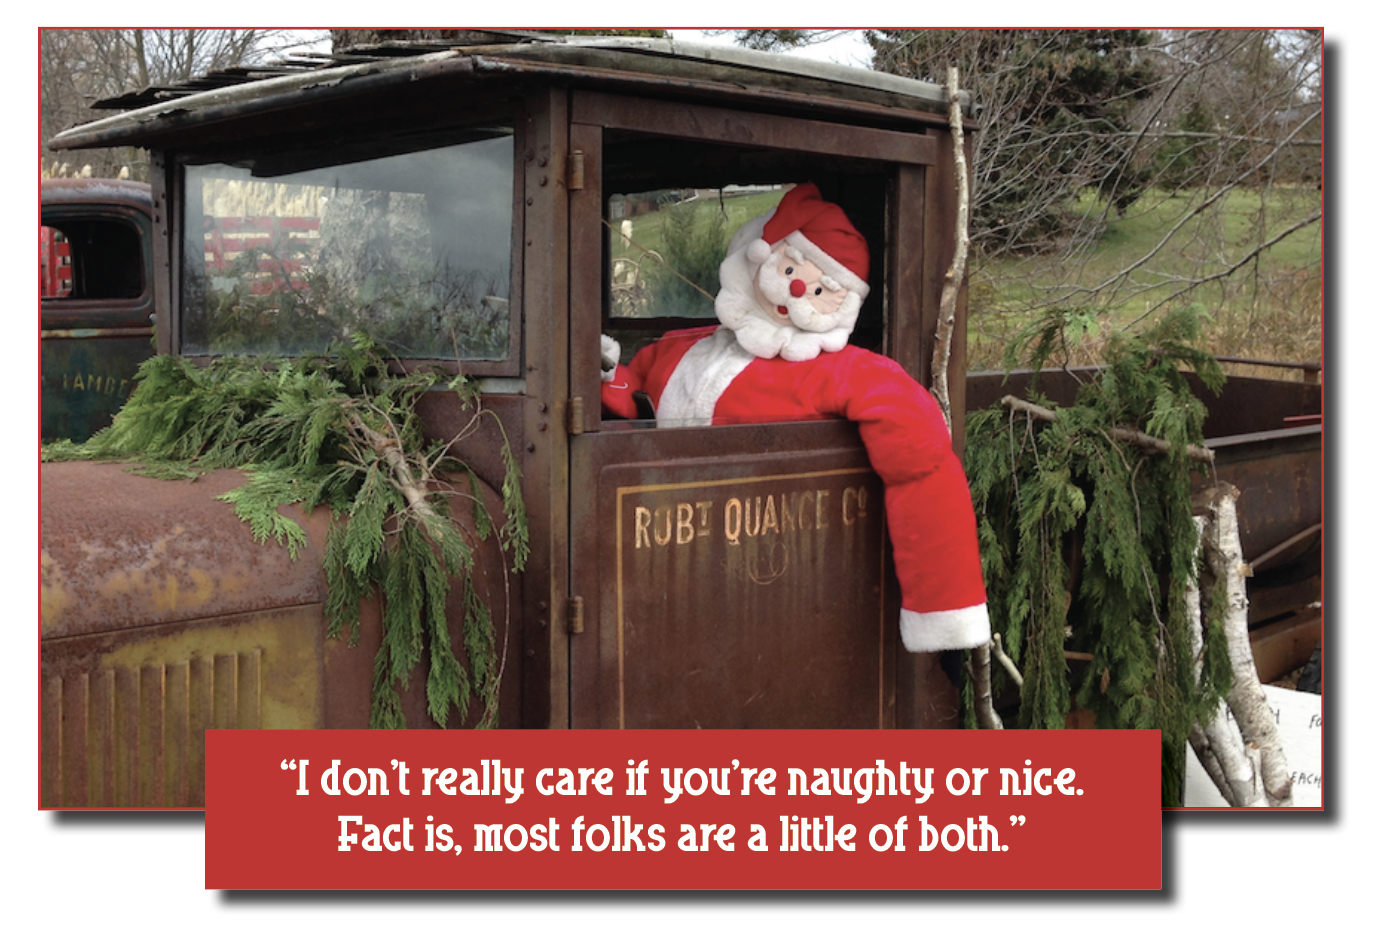 SLE

“I don't really care if you're naughty or nice.
Fact is, most folks are a little of both.”